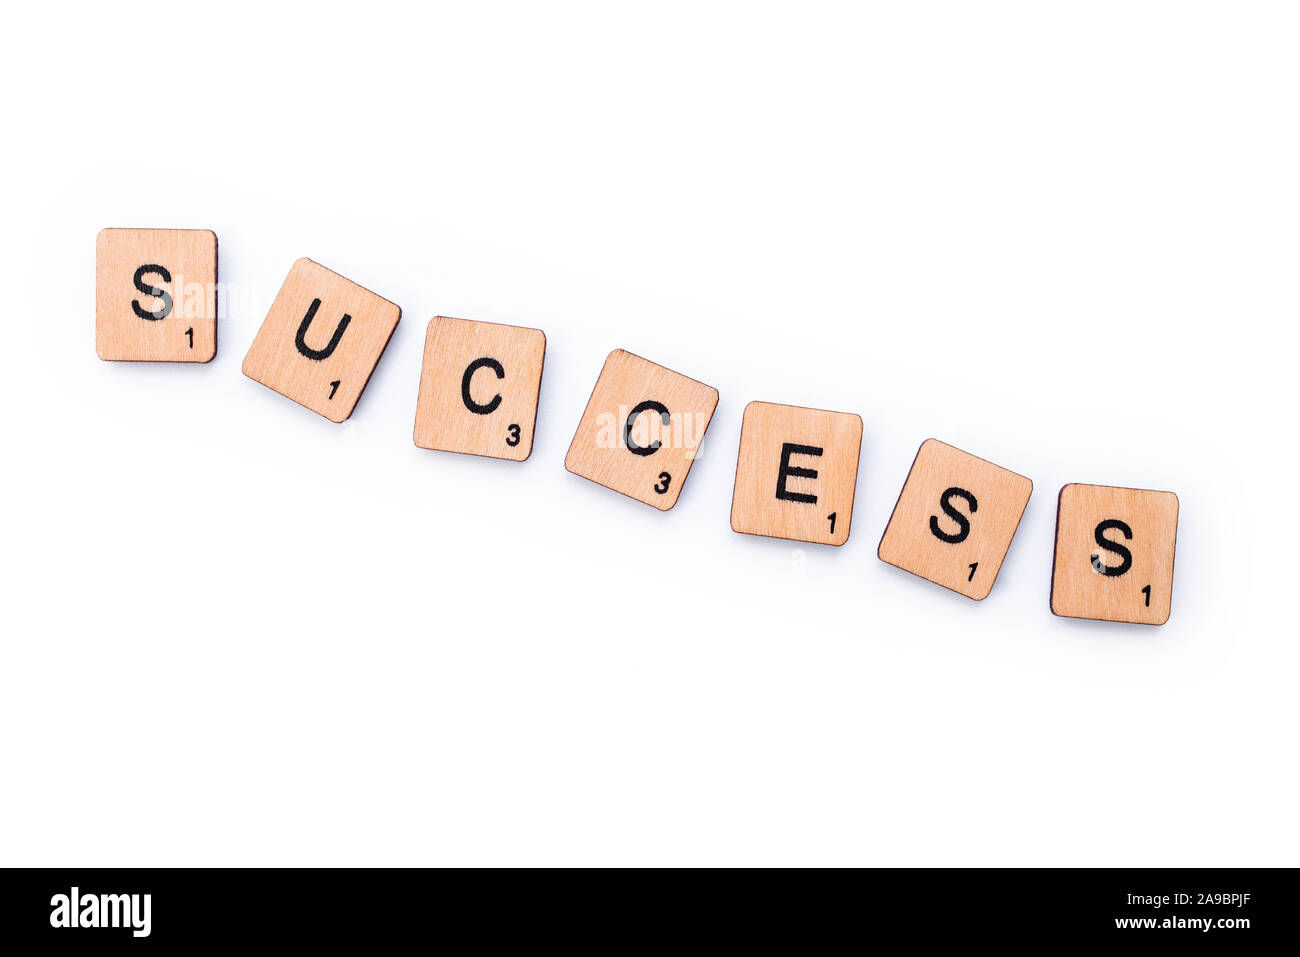 London, UK - February 13th 2019: The word SUCCESS, spelt with wooden letter tiles over a white background. Stock Photo